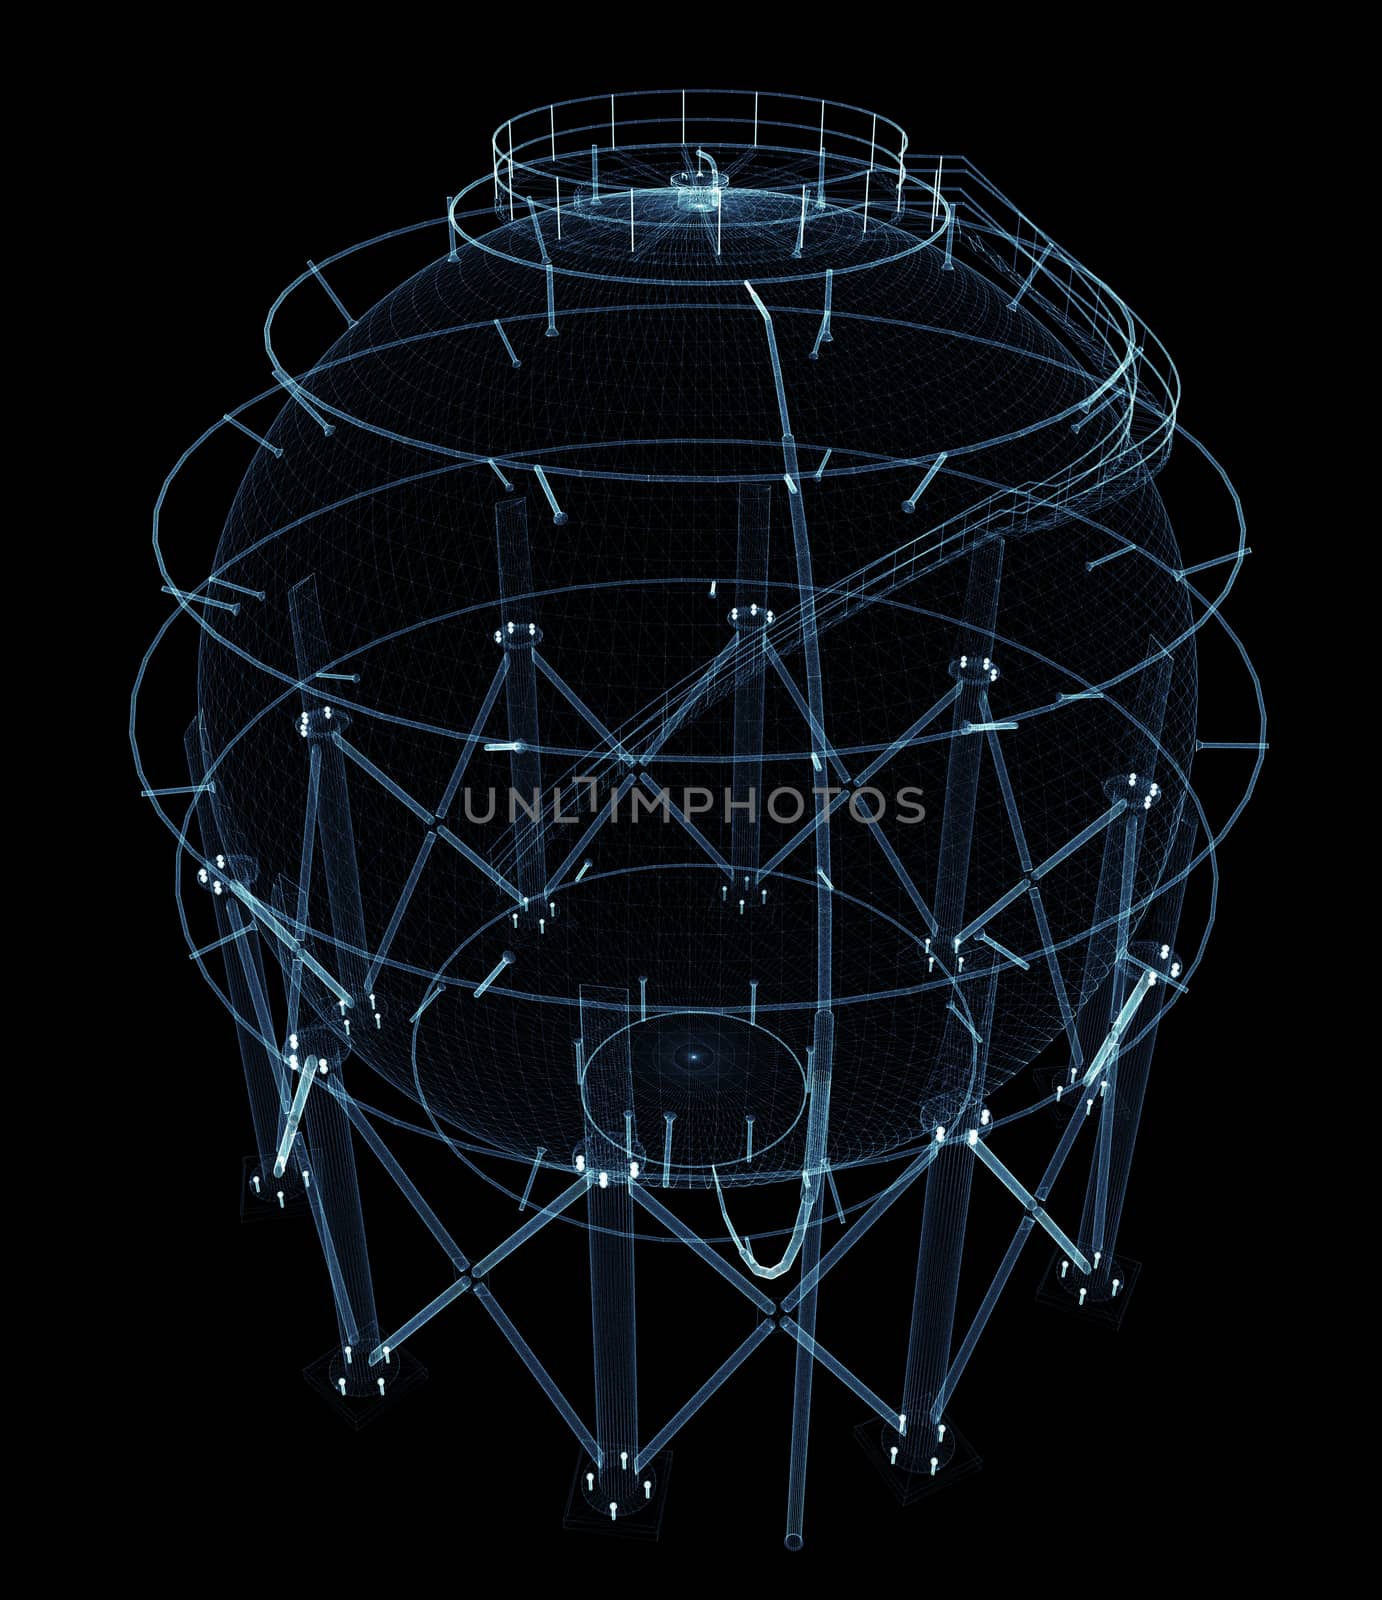 Spherical gas tank consisting of luminous lines and dots. 3d illustration on a black background